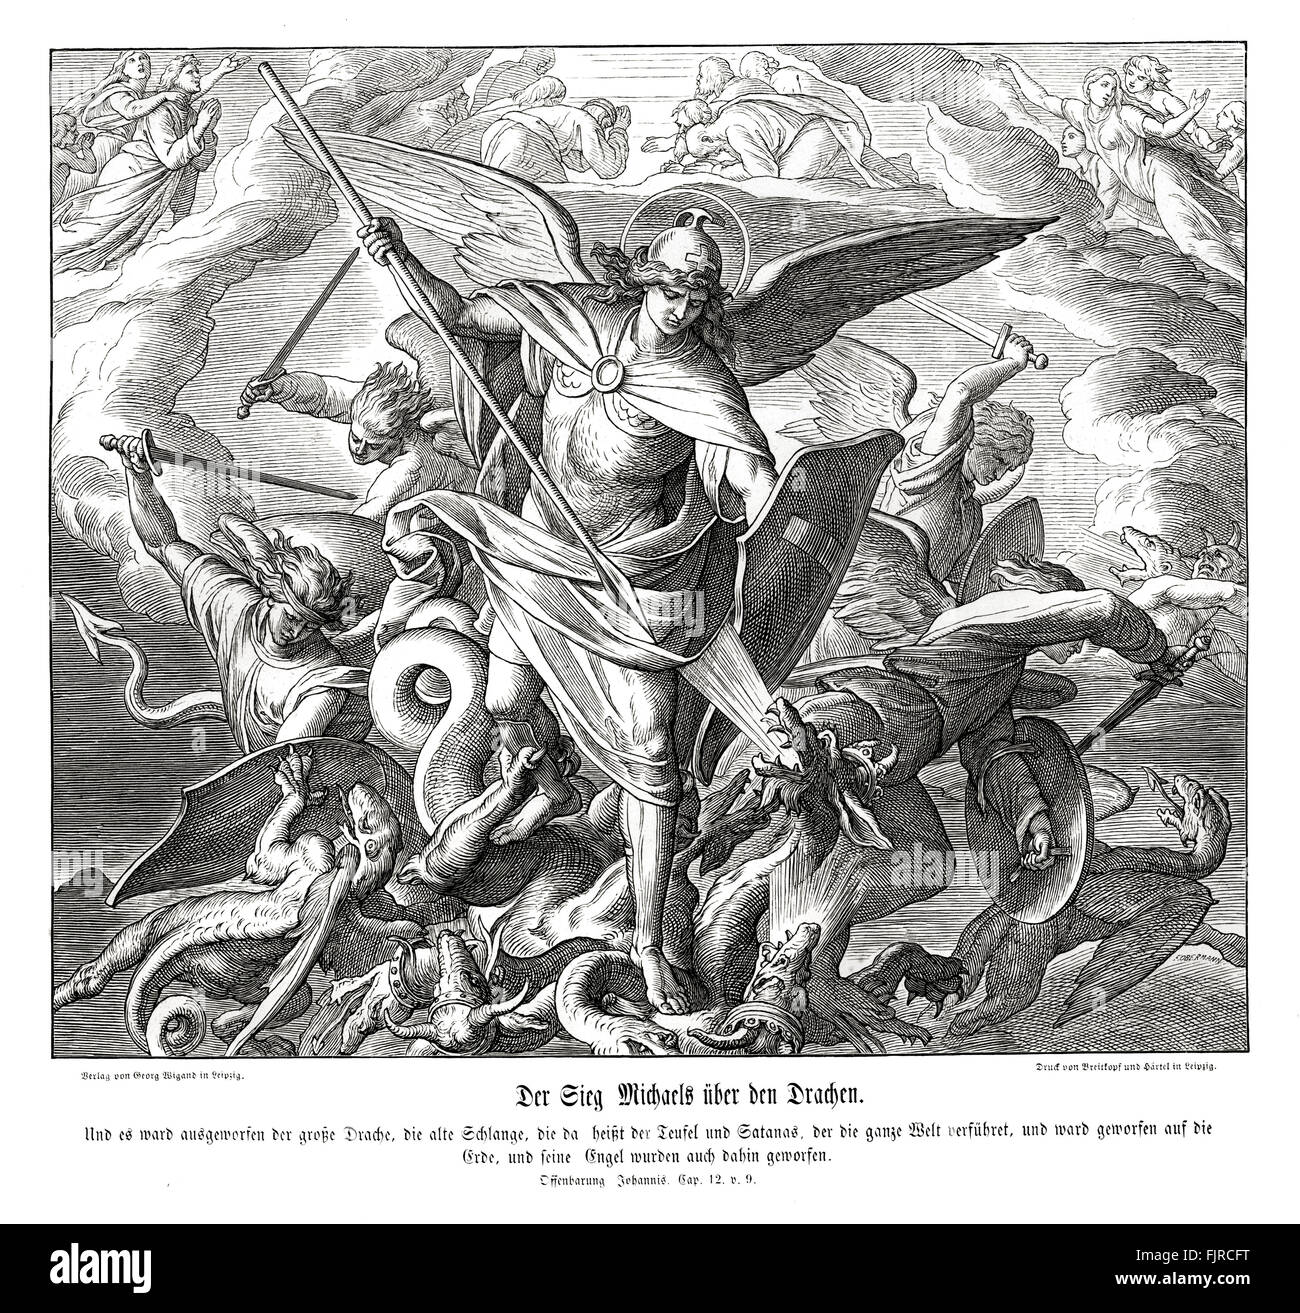 Michael's victory over the dragon, Revelation of John chapter XII verse 9 'And the great dragon was cast out, that old serpent, called the Devil, and Satan, which deceiveth the whole world: he was cast out into the earth, and his angels were cast out with him.' 1852-60 illustration by Julius Schnorr von Carolsfeld Stock Photo